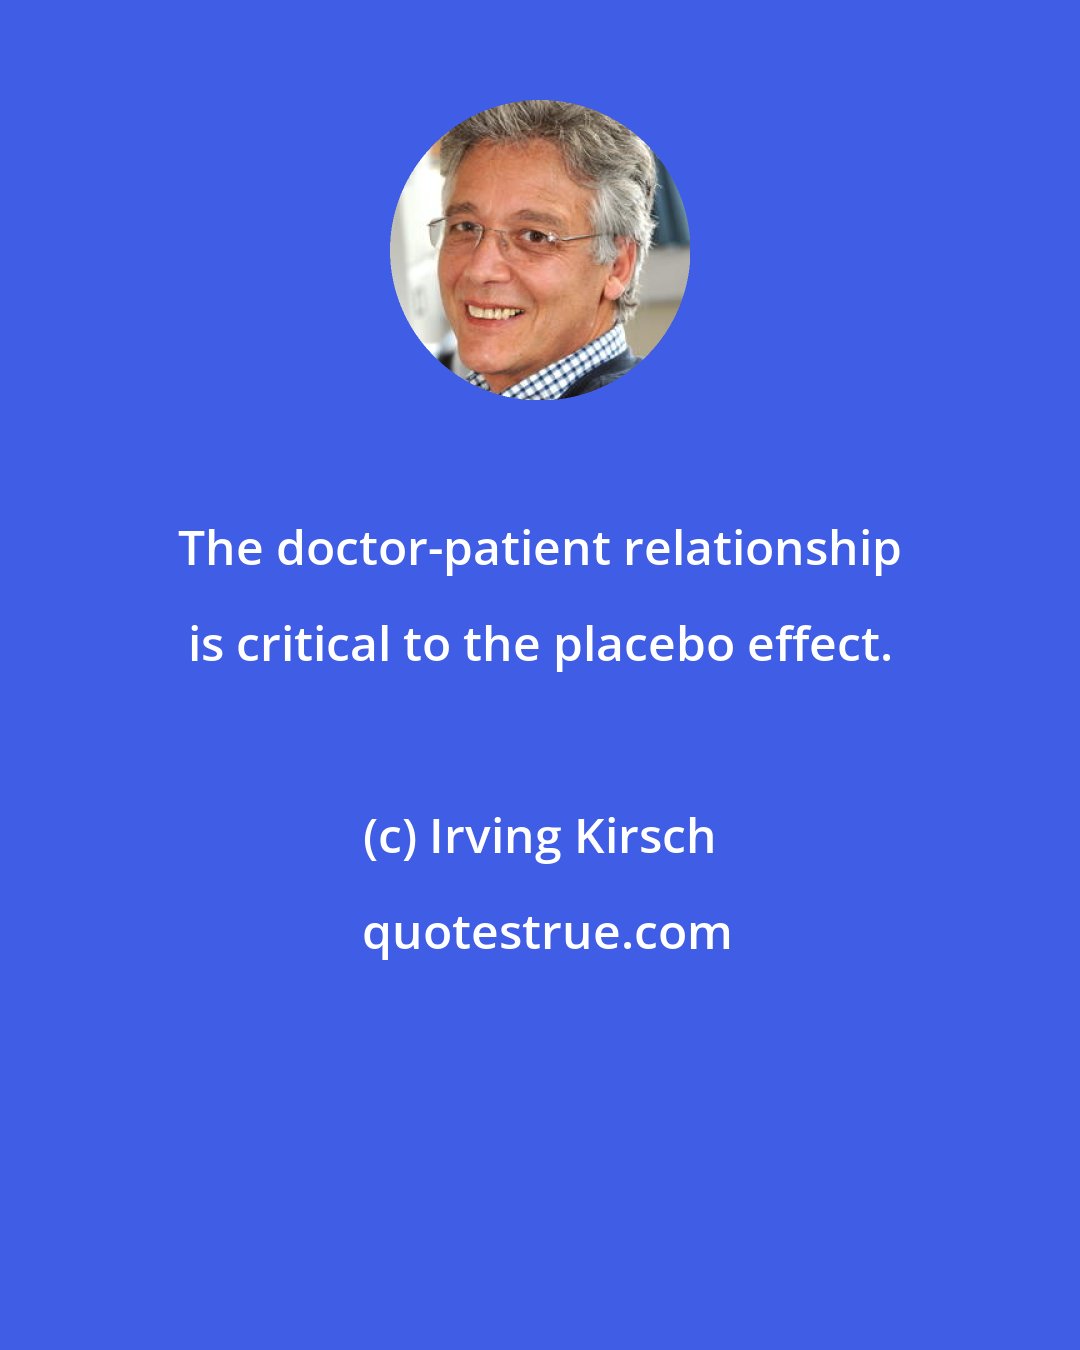 Irving Kirsch: The doctor-patient relationship is critical to the placebo effect.